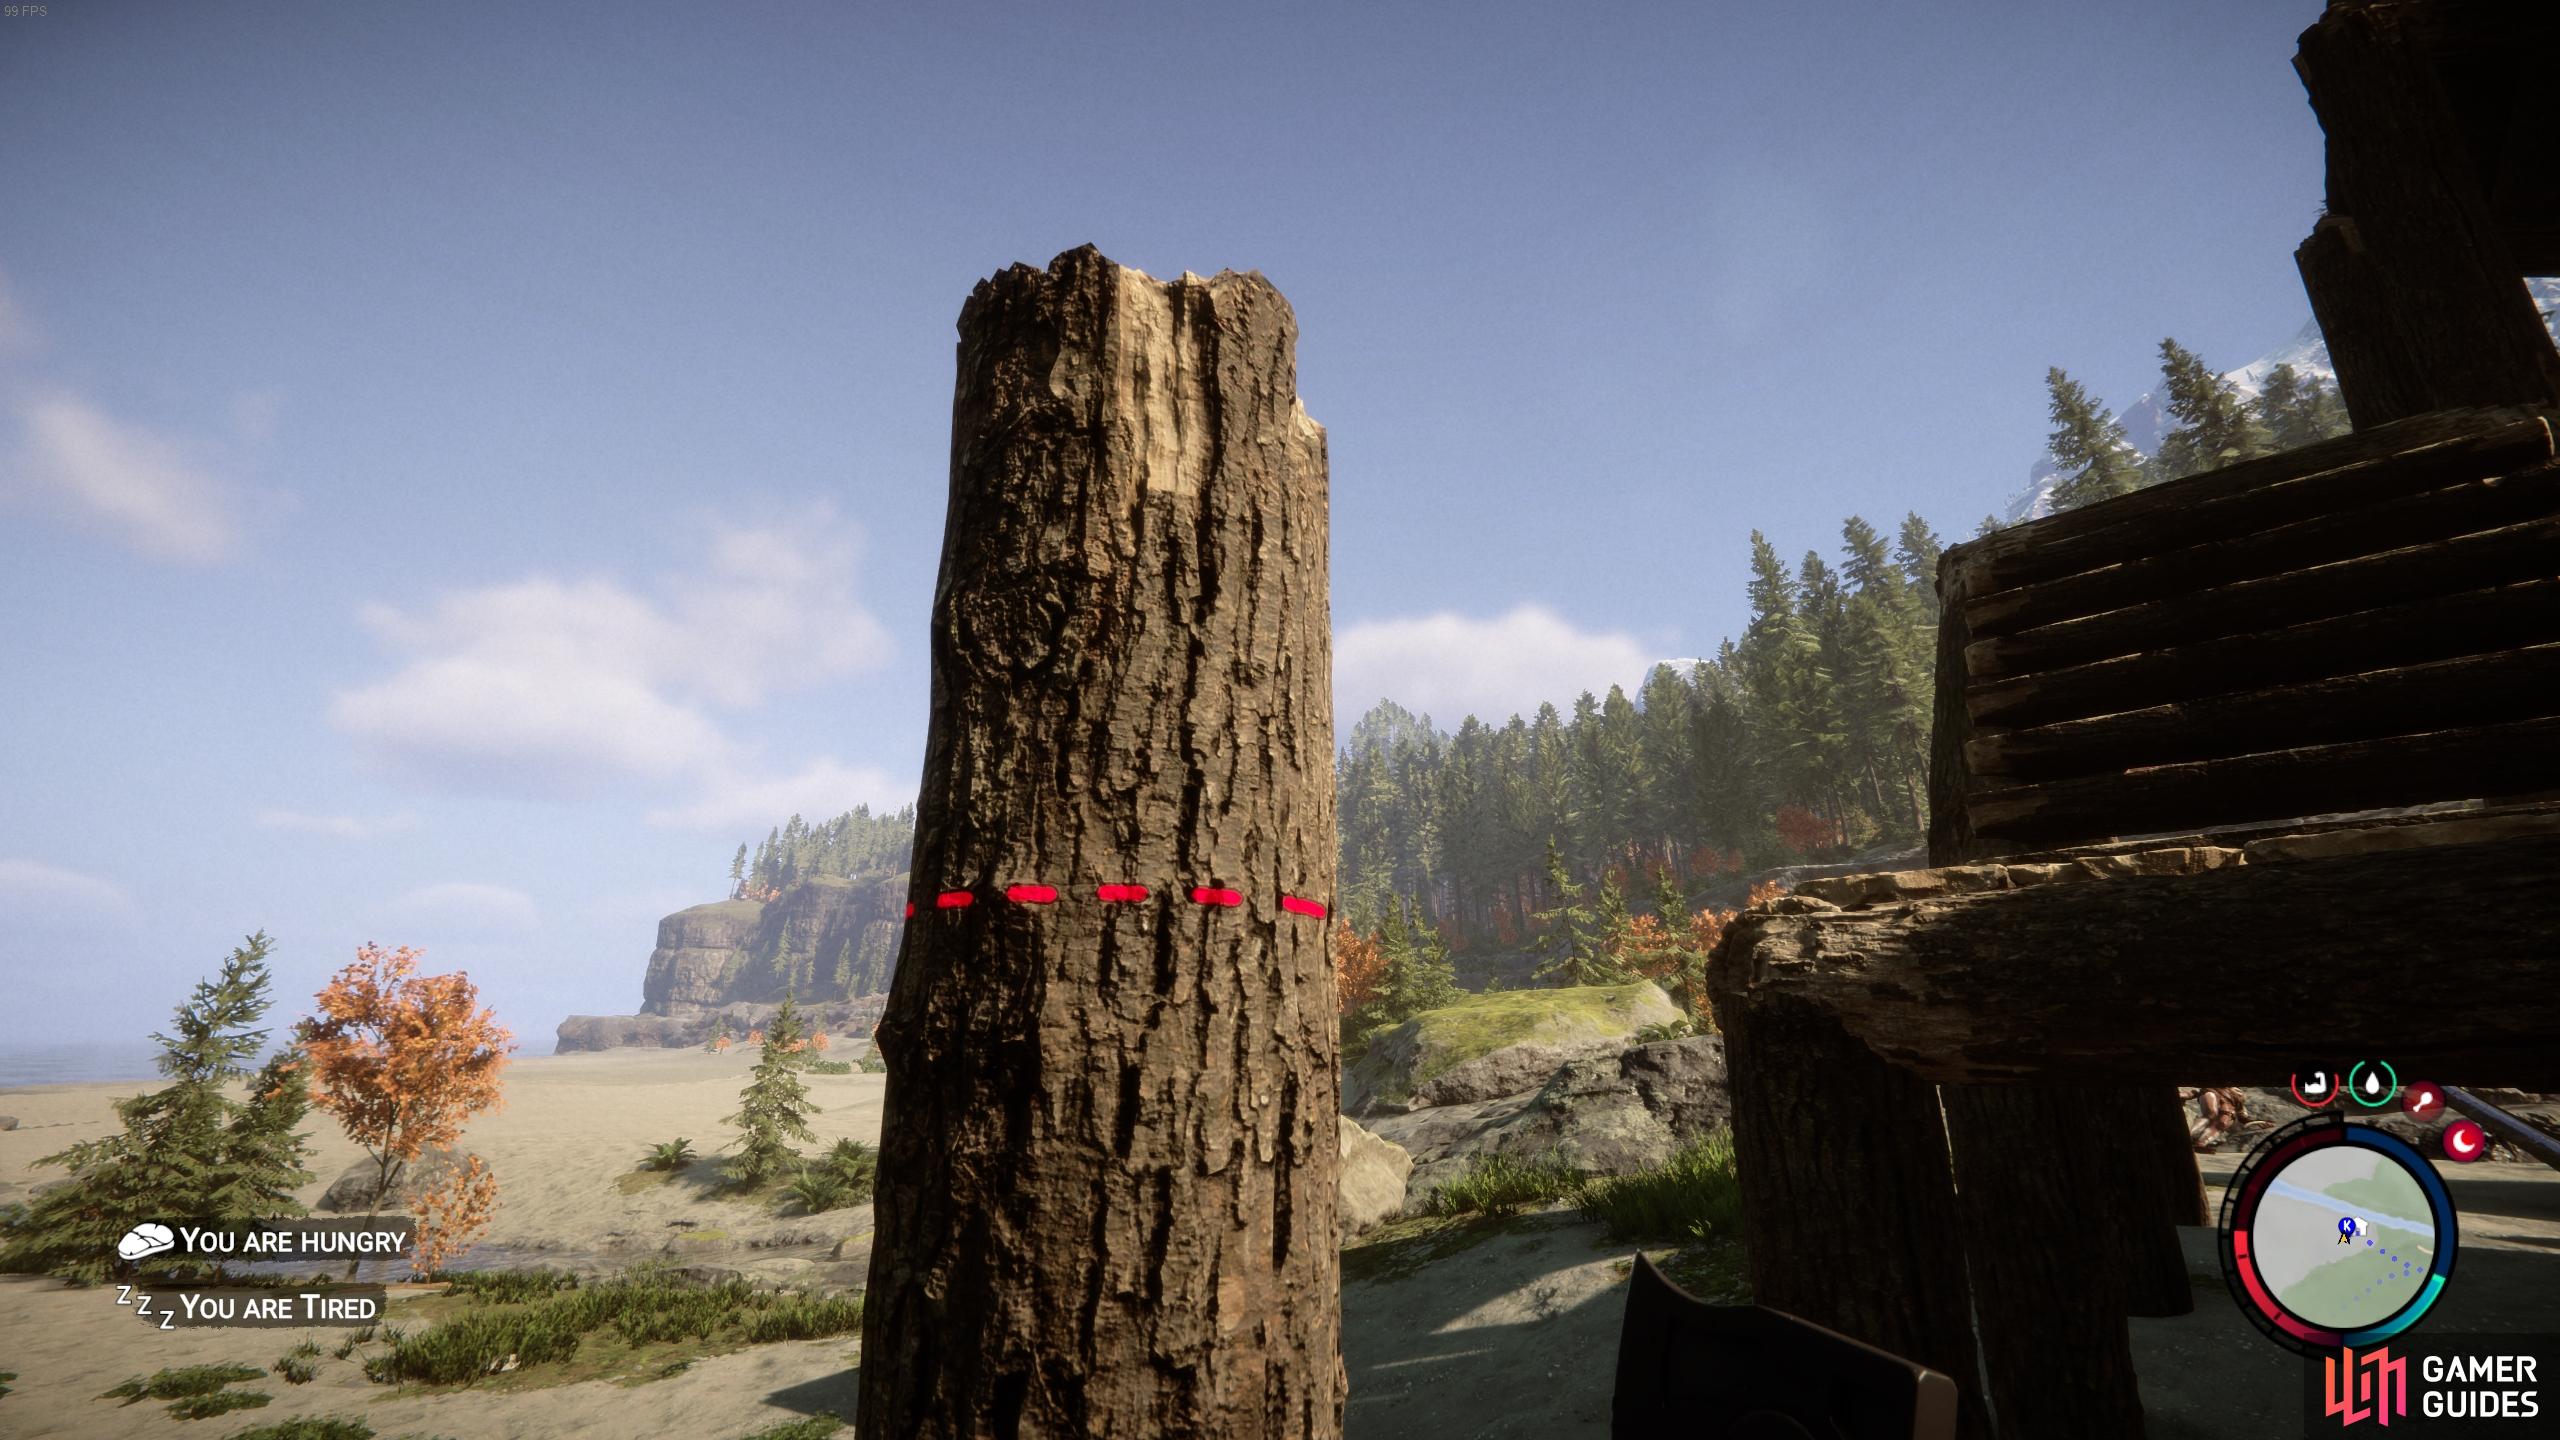 If the new strut log is too tall, you can cut it at the top.